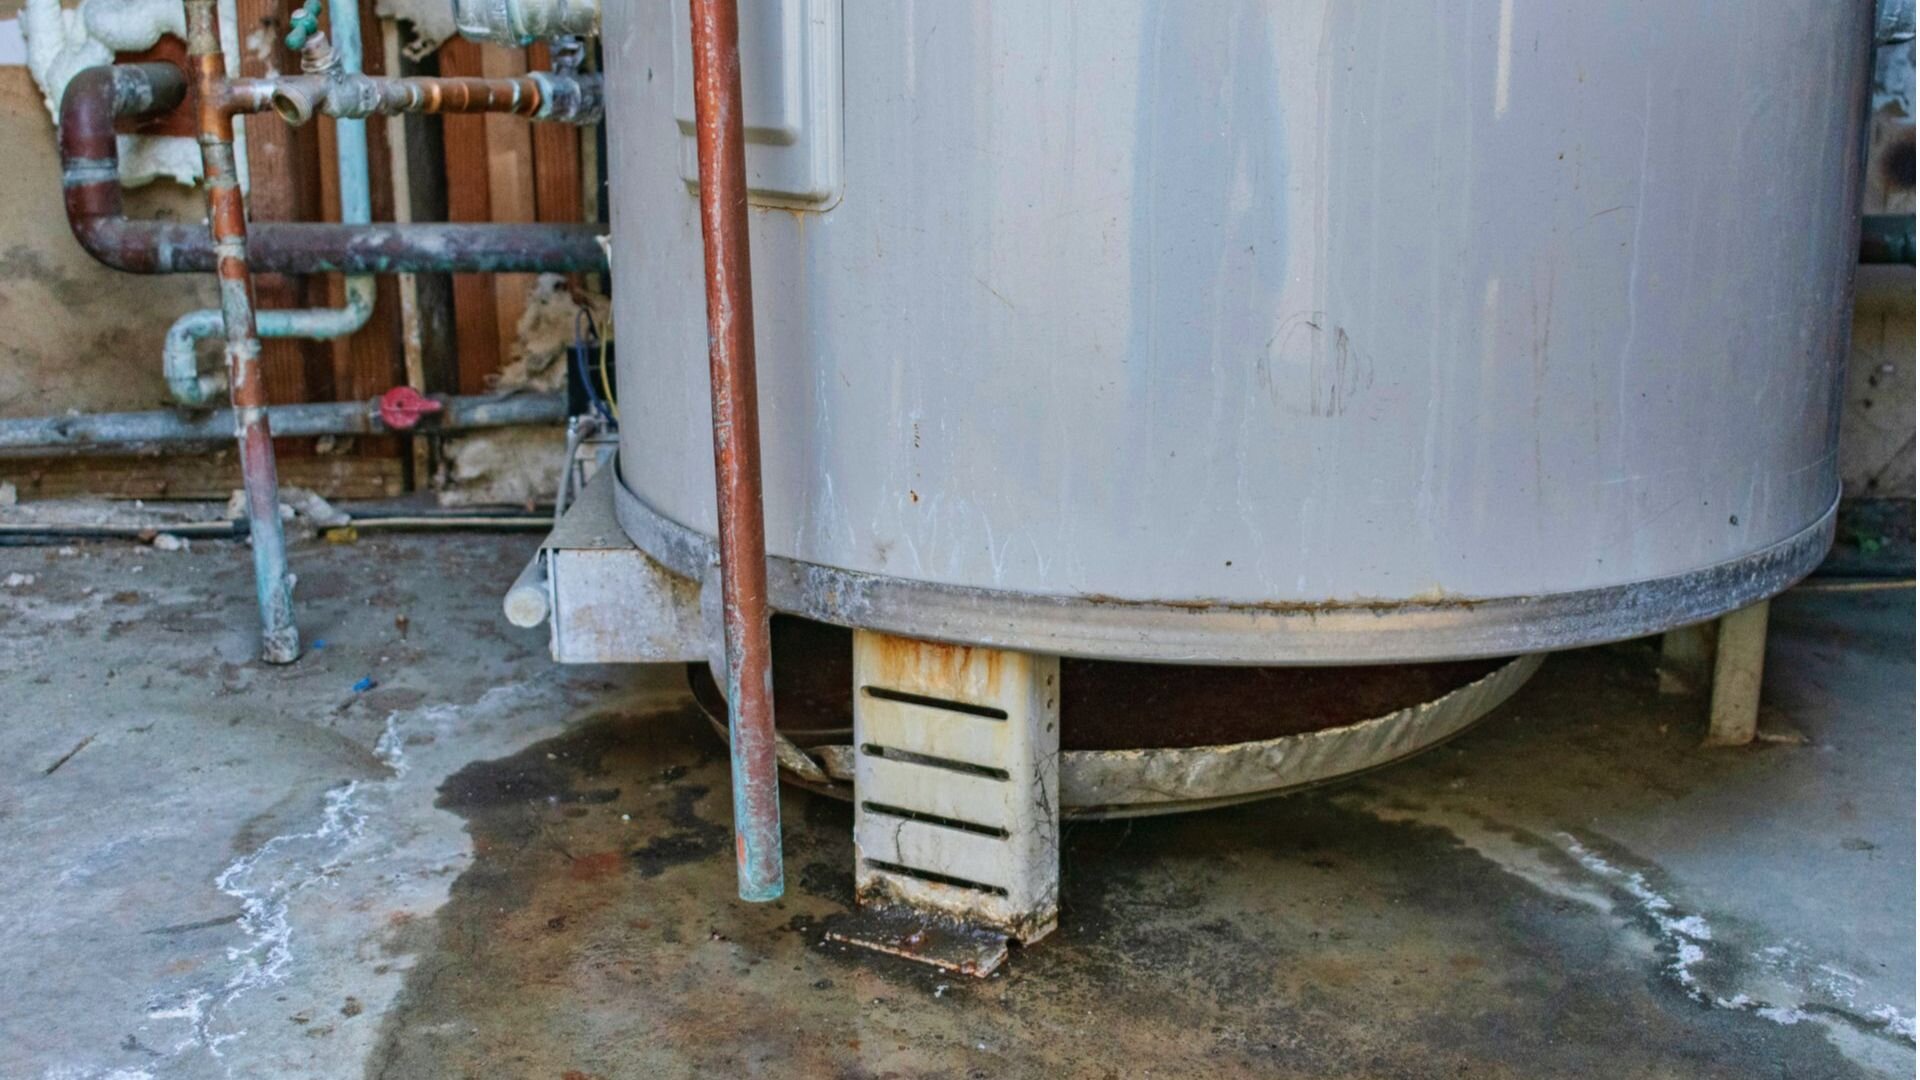 Common Causes of Hot Water System Leaks - Expert Troubleshooting ...